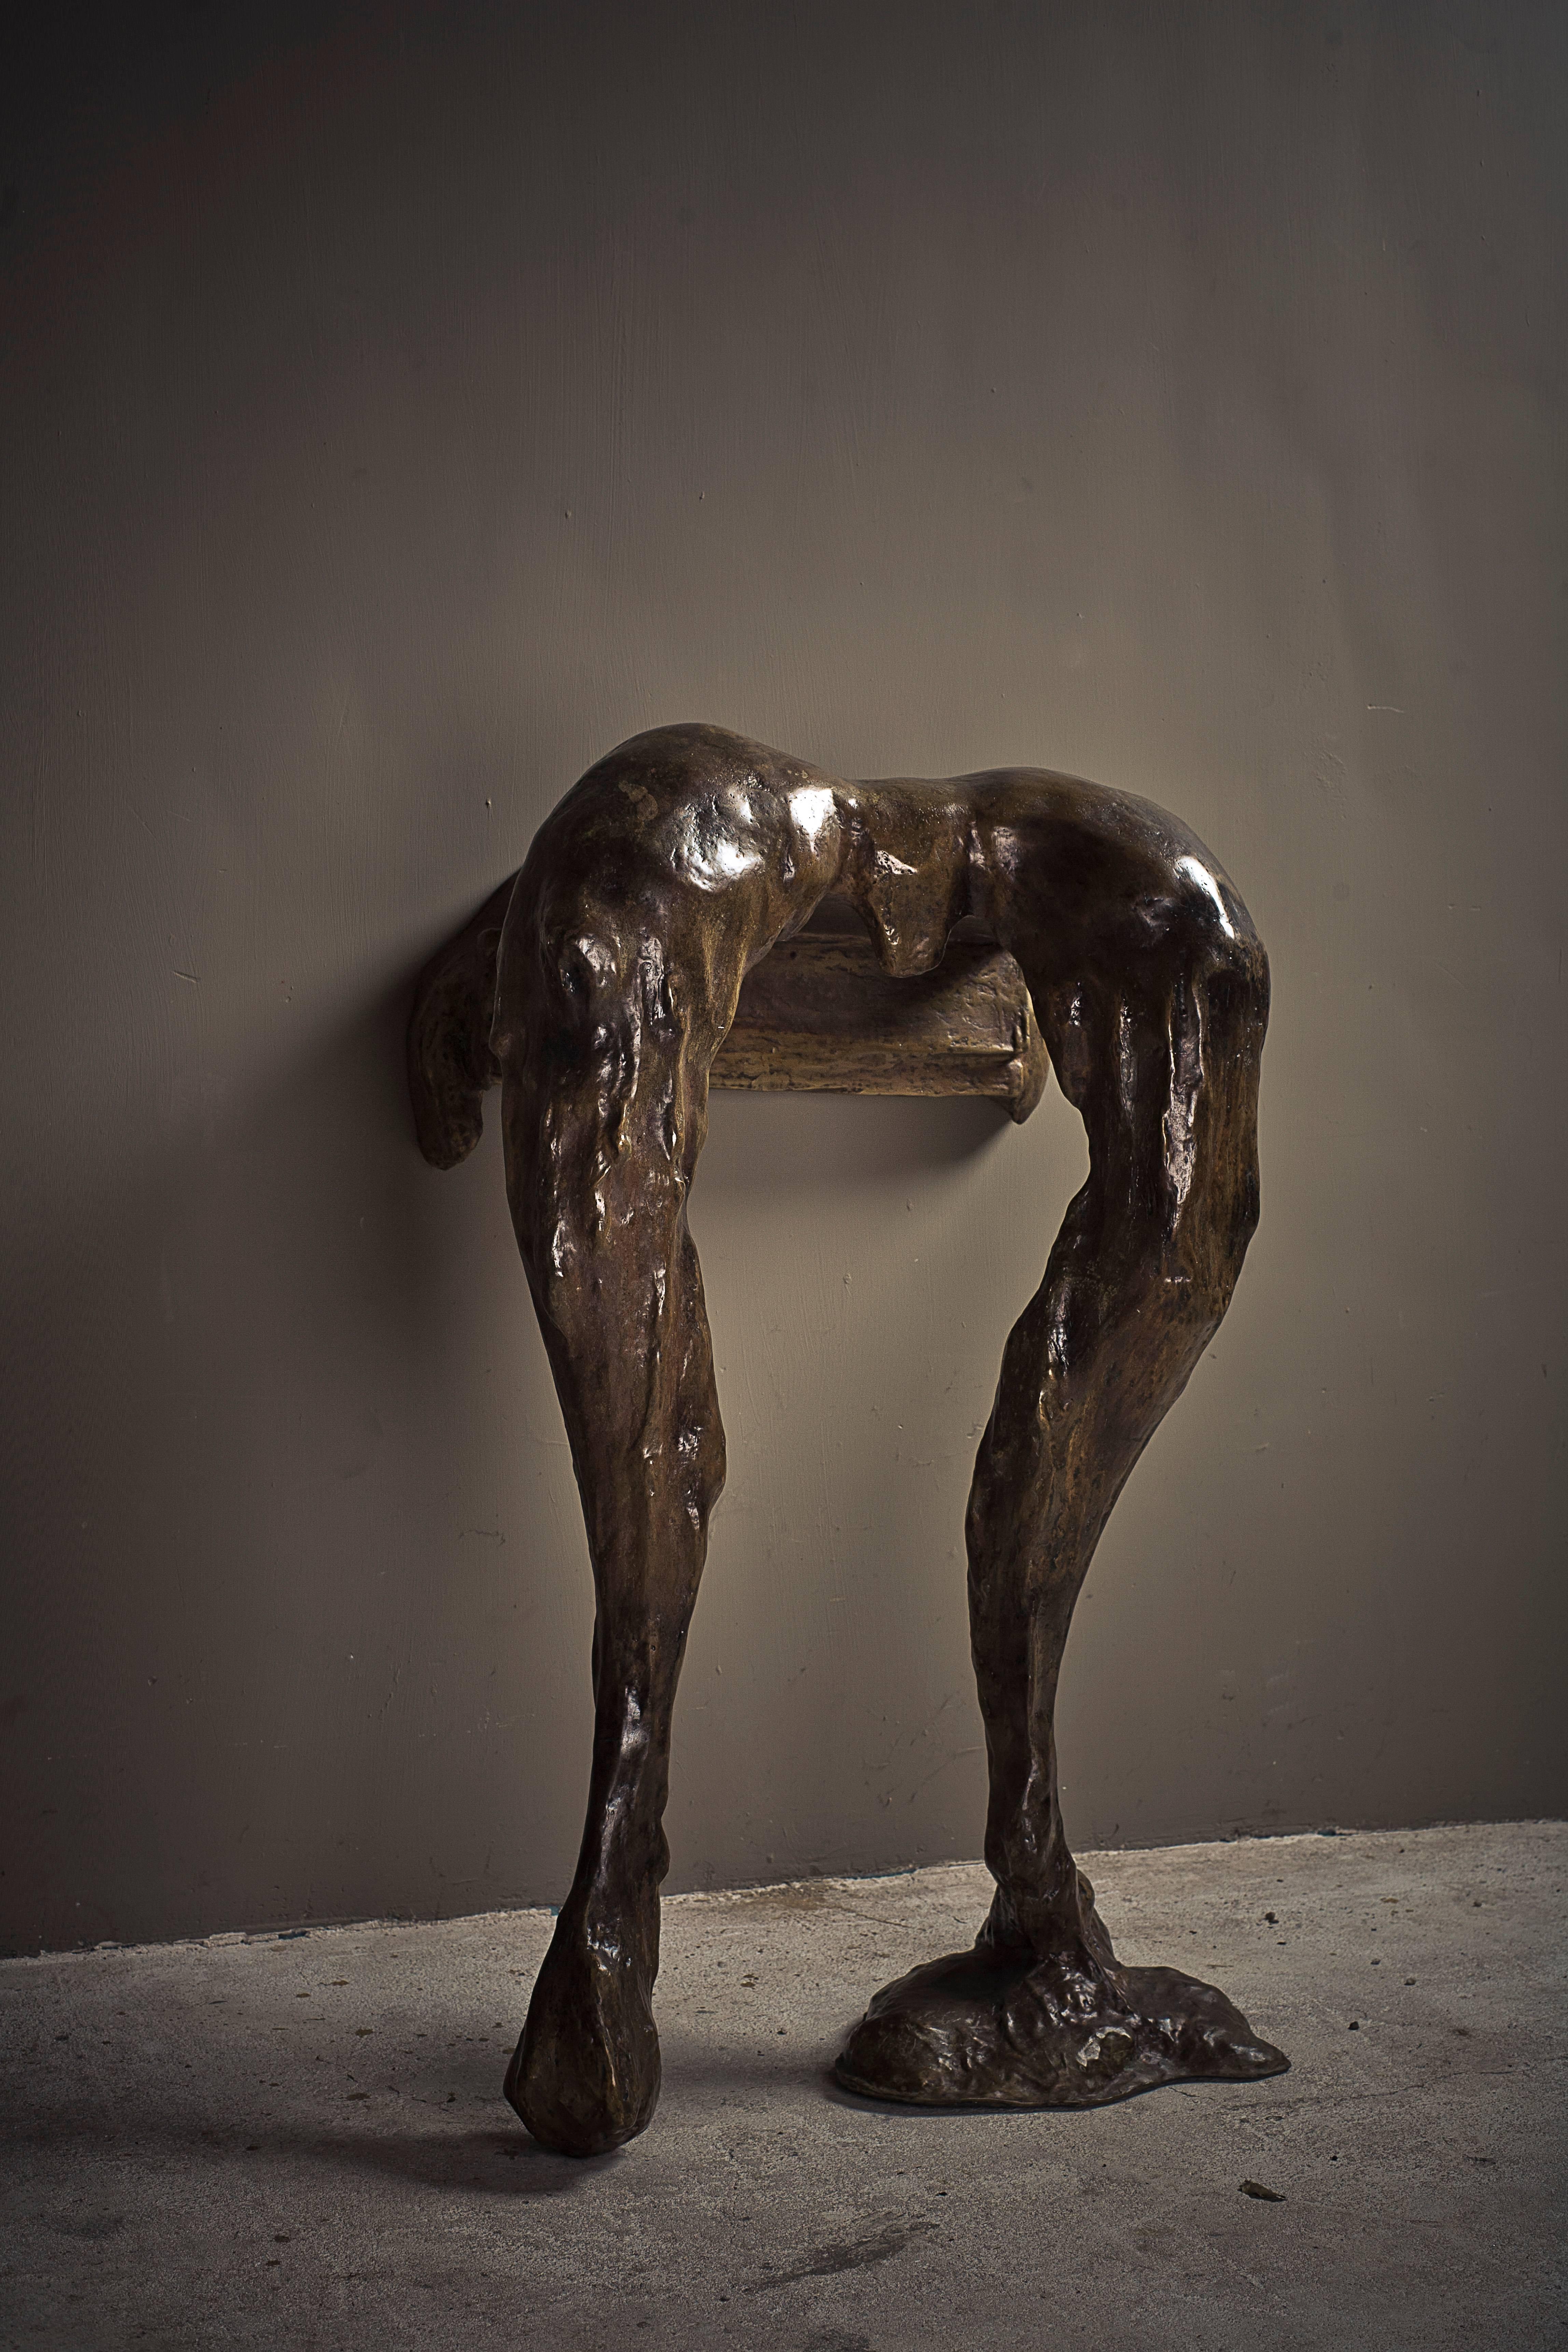 LPB bronze console, signed by Kevin de Winter, WDSTCK Studio

The Love, the Pain, the Beauty arose in a phase in which Kevin de Winter was triggered by the Paradox between love and sorrow. During the design process he dealt with questions such as;